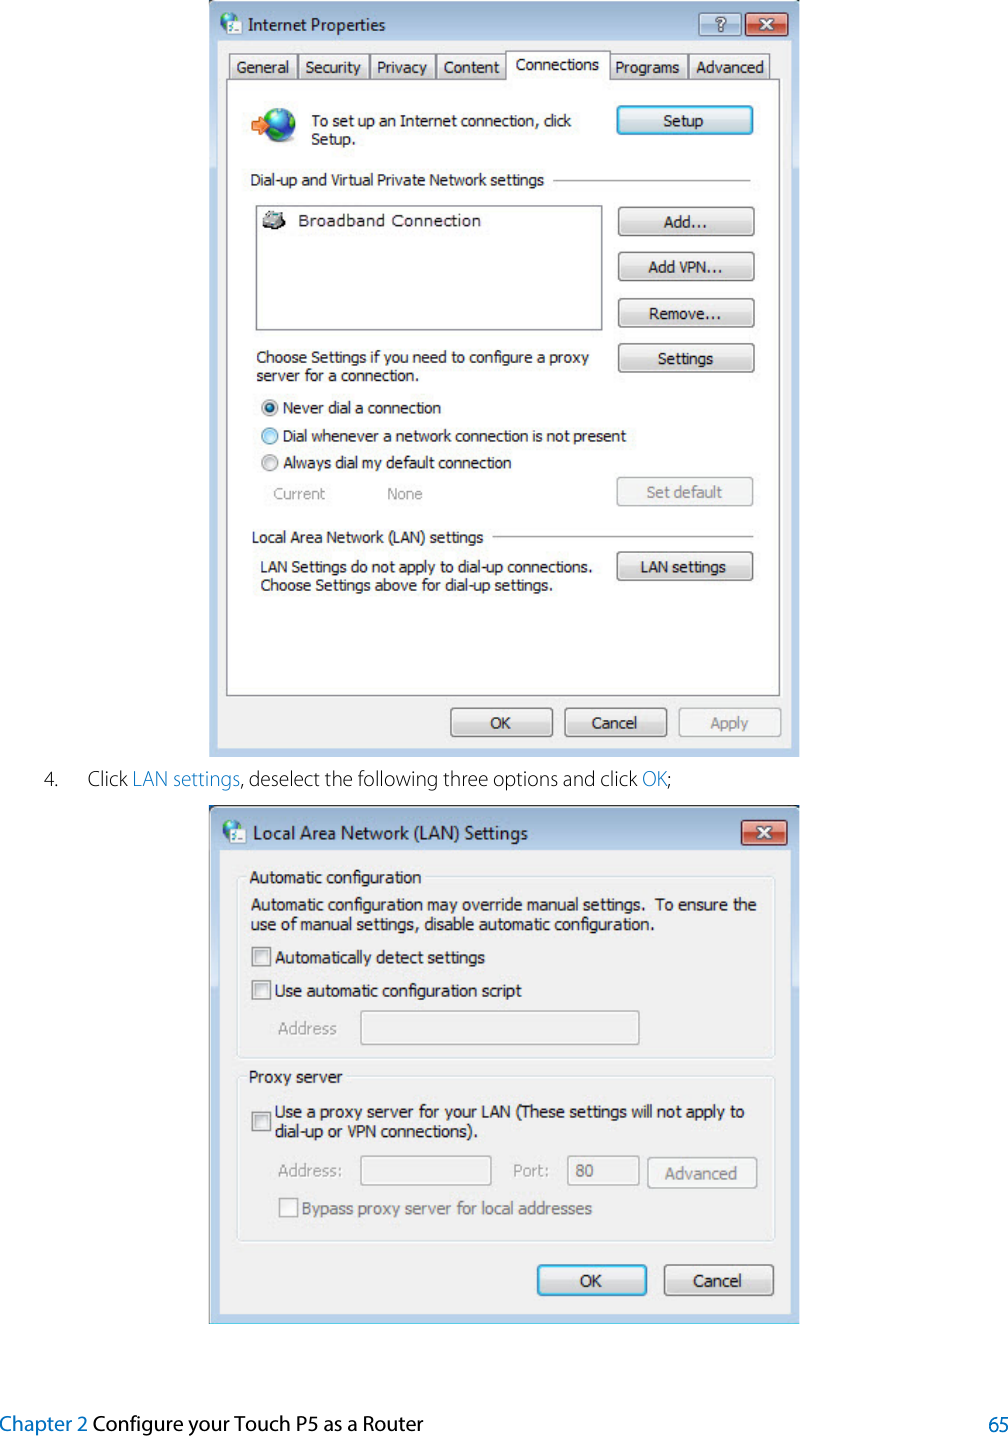   4. Click LAN settings, deselect the following three options and click OK;  Chapter 2 Configure your Touch P5 as a Router 65 